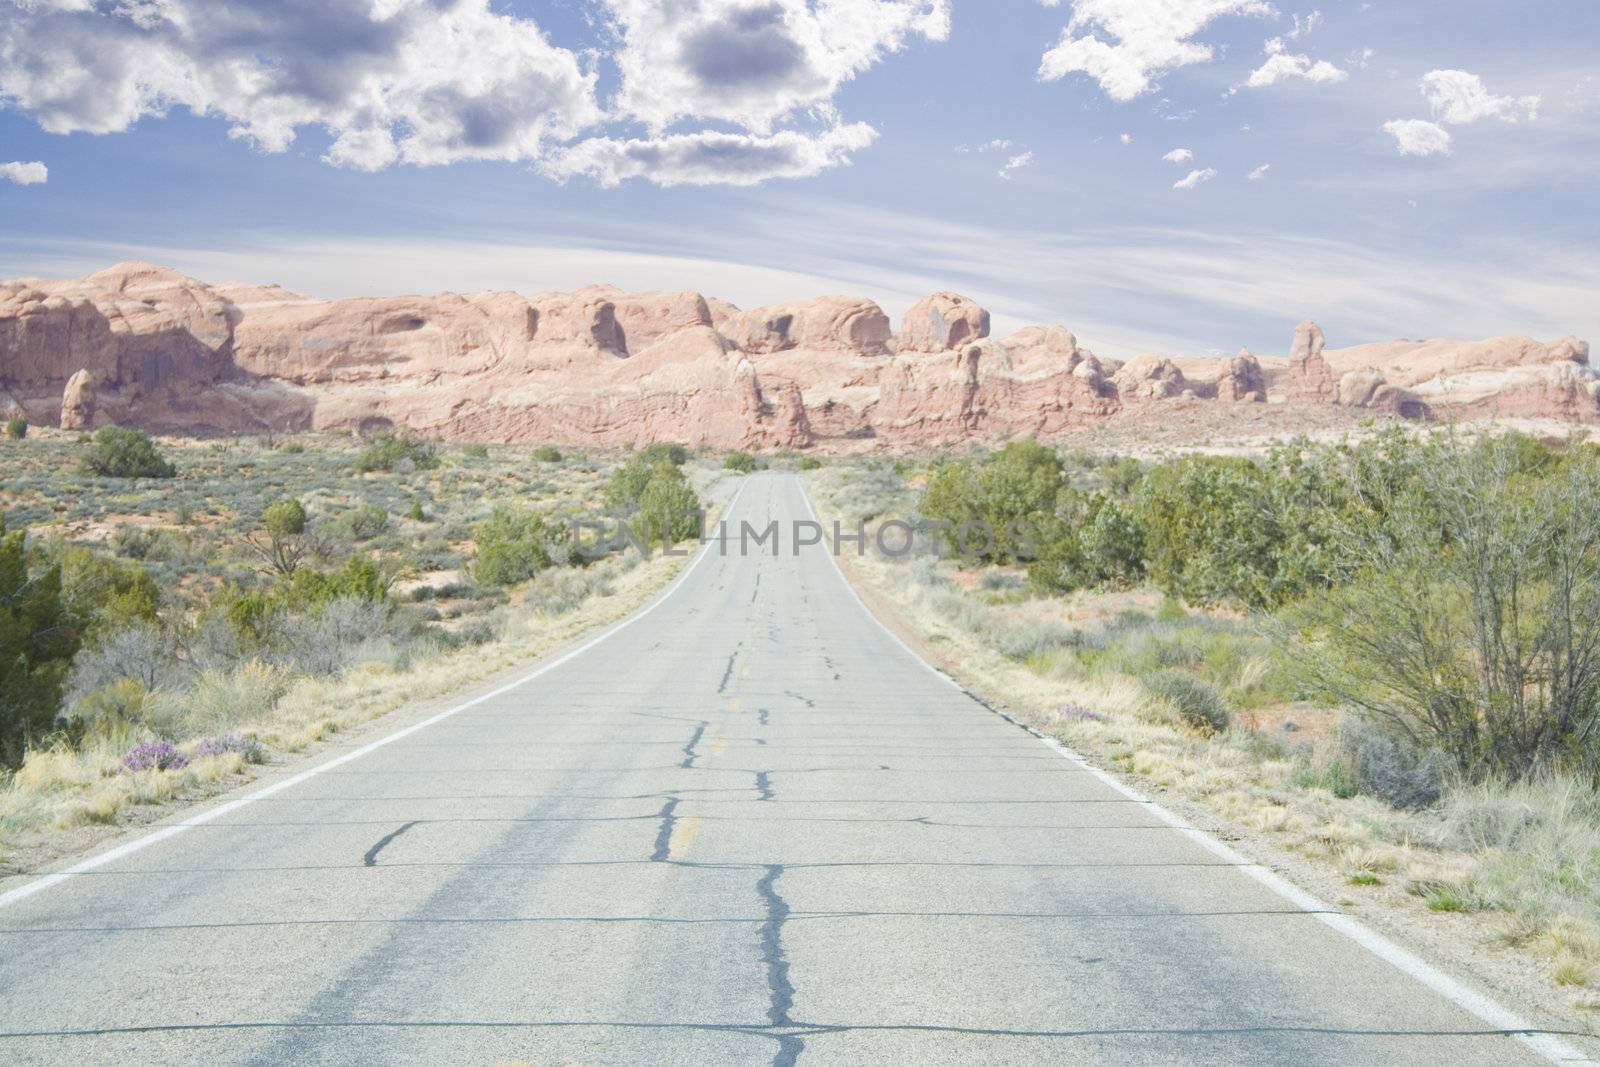 road through arches area mountains and spires in Utah USA